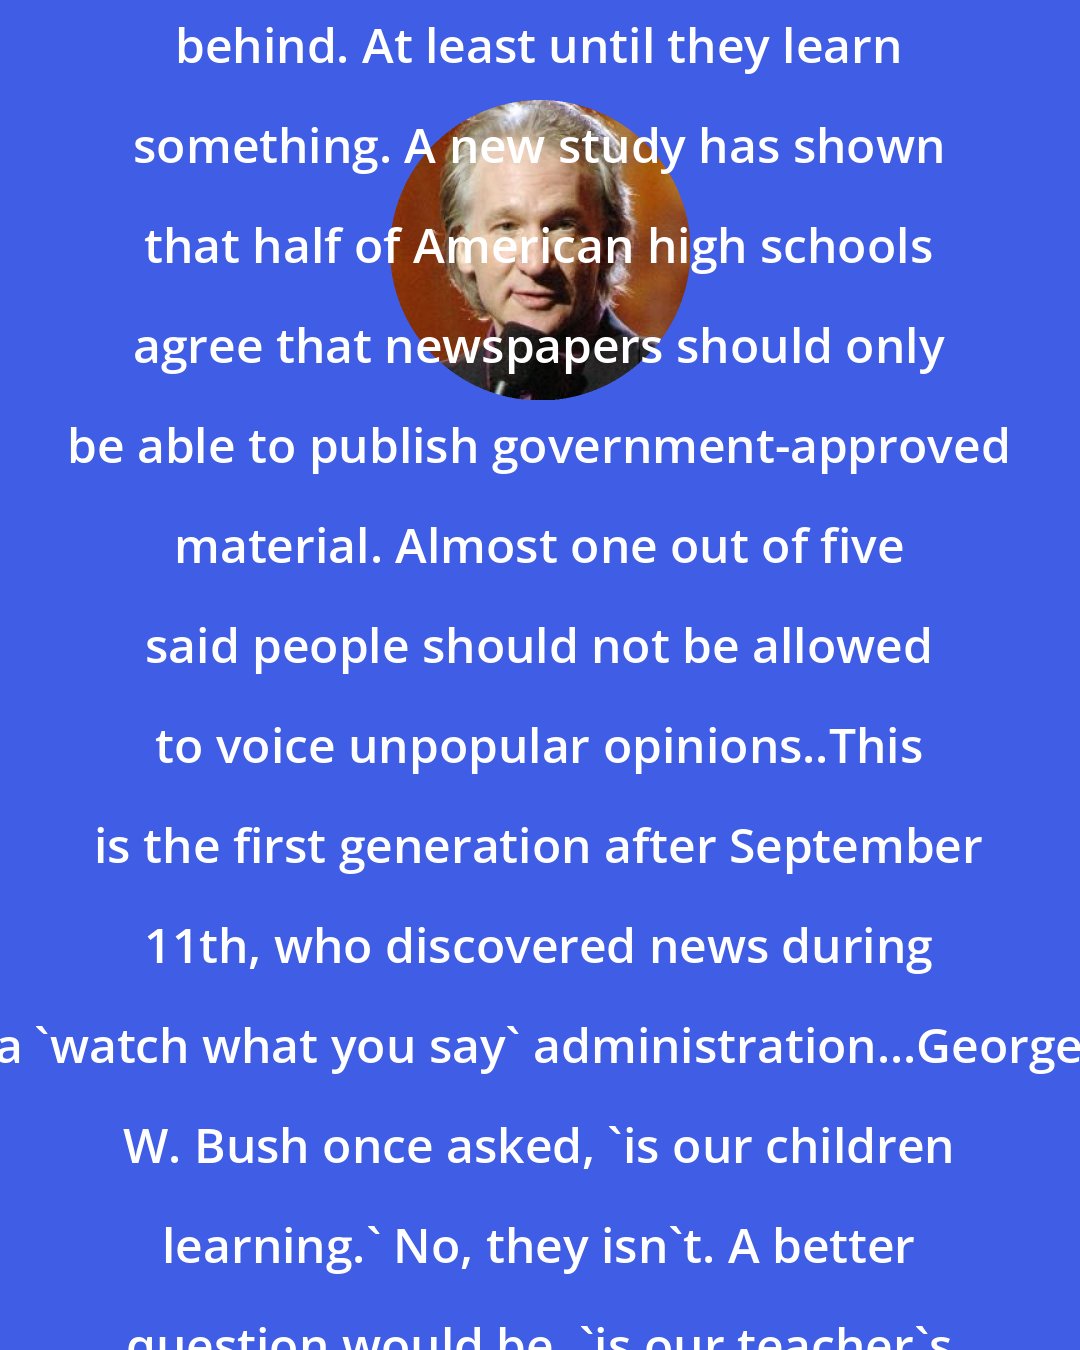 Bill Maher: NEW RULE: 'Kidiots' Leave the children behind. At least until they learn something. A new study has shown that half of American high schools agree that newspapers should only be able to publish government-approved material. Almost one out of five said people should not be allowed to voice unpopular opinions..This is the first generation after September 11th, who discovered news during a 'watch what you say' administration...George W. Bush once asked, 'is our children learning.' No, they isn't. A better question would be, 'is our teacher's teaching?